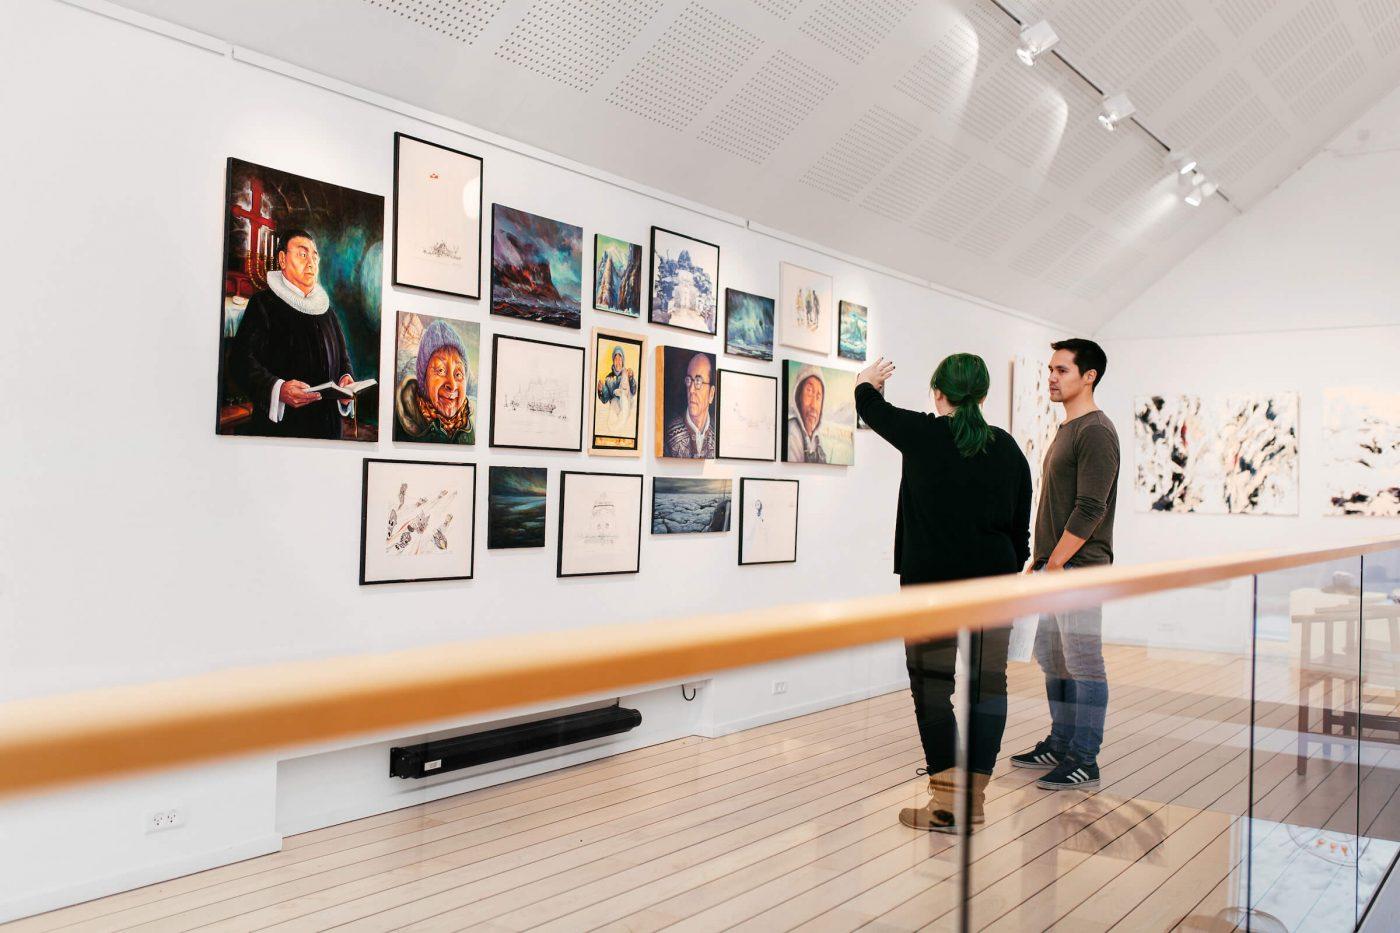 Visitors of Nuuk Art Museum talking about and looking at art from the Kimik exhibition. Photo by Rebecca Gustafsson